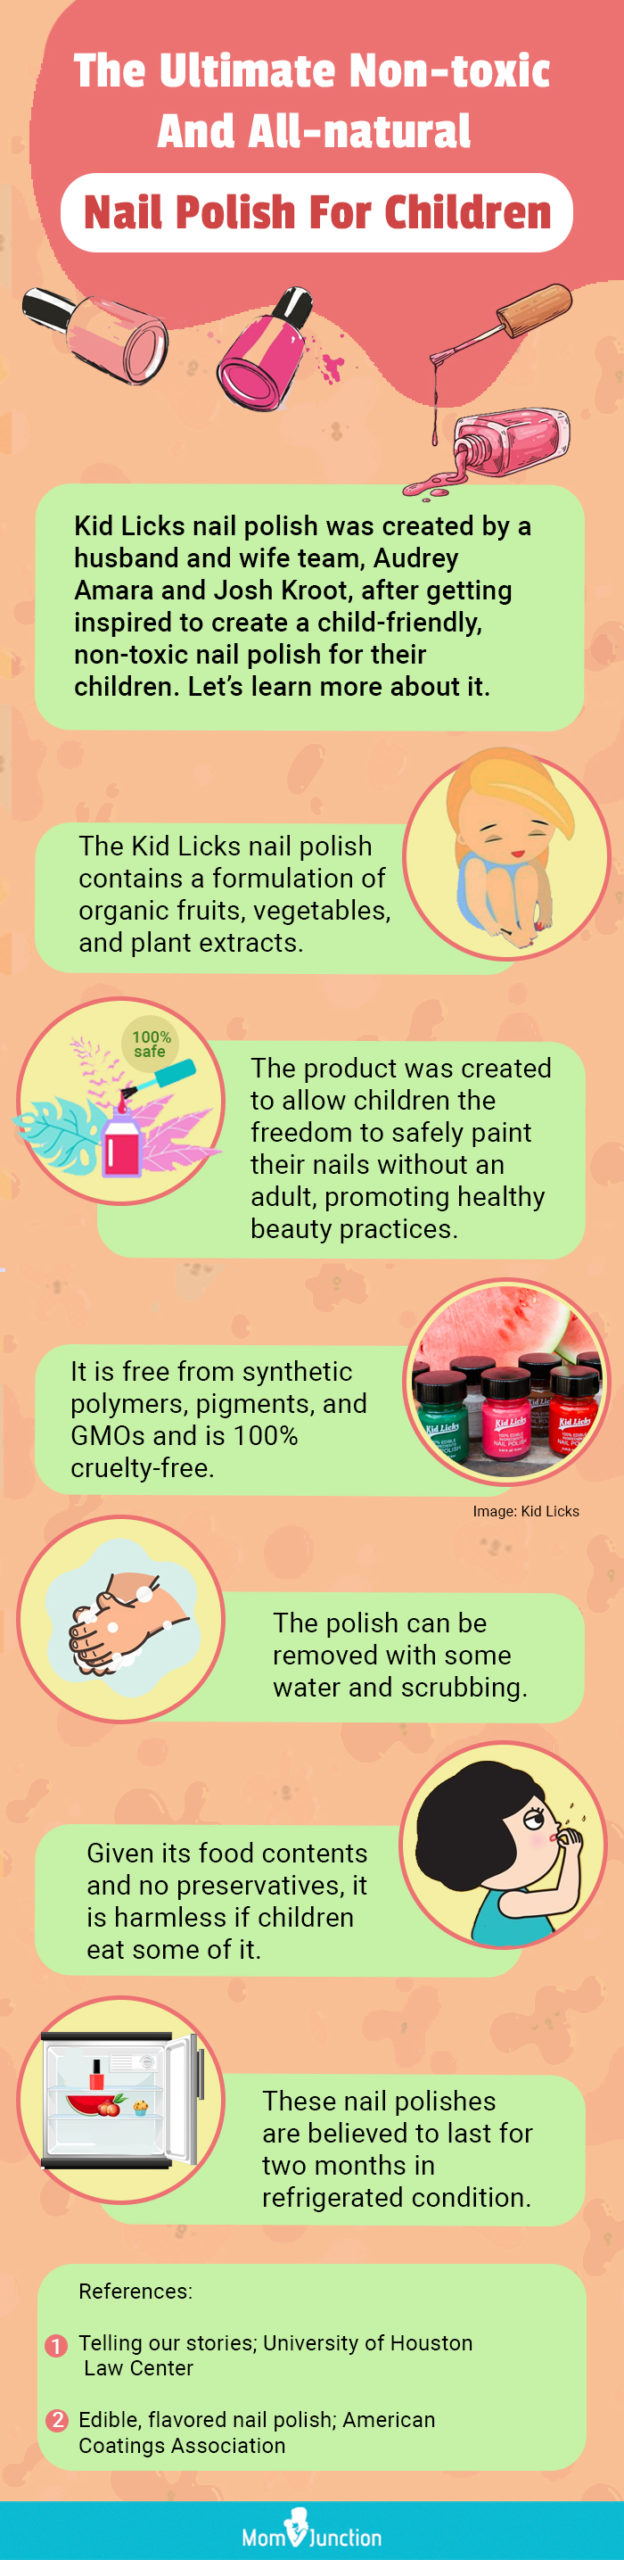 non toxic and all natural nail polish for children [infographic]